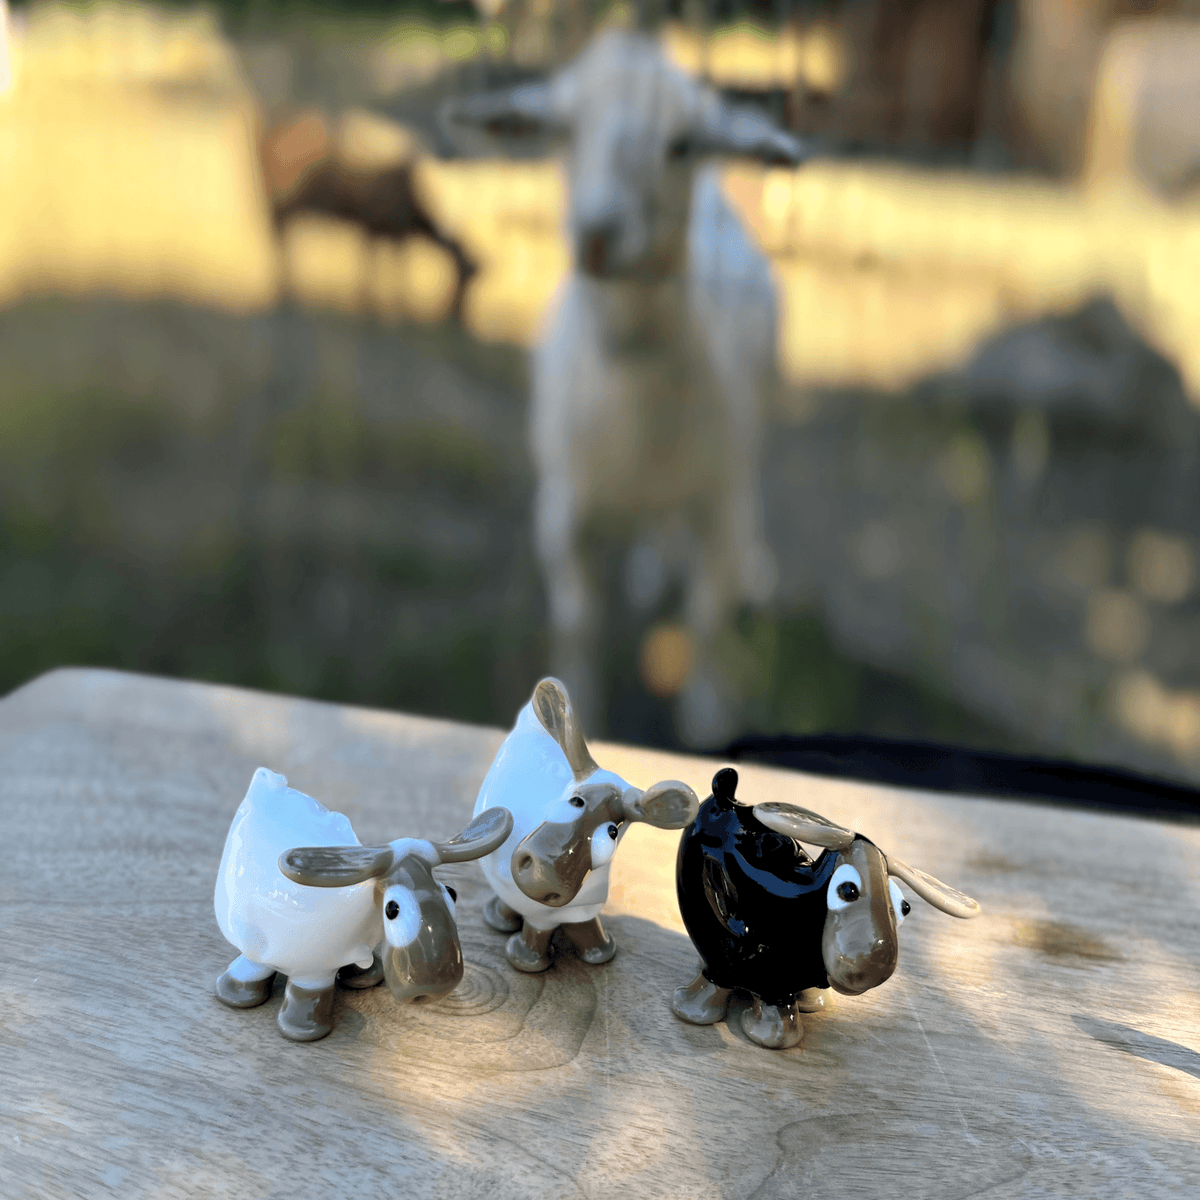 Murano Glass Sheep, Glass Sculpture, Figurines, Set of 3, Made in Italy at MyItalianDecor